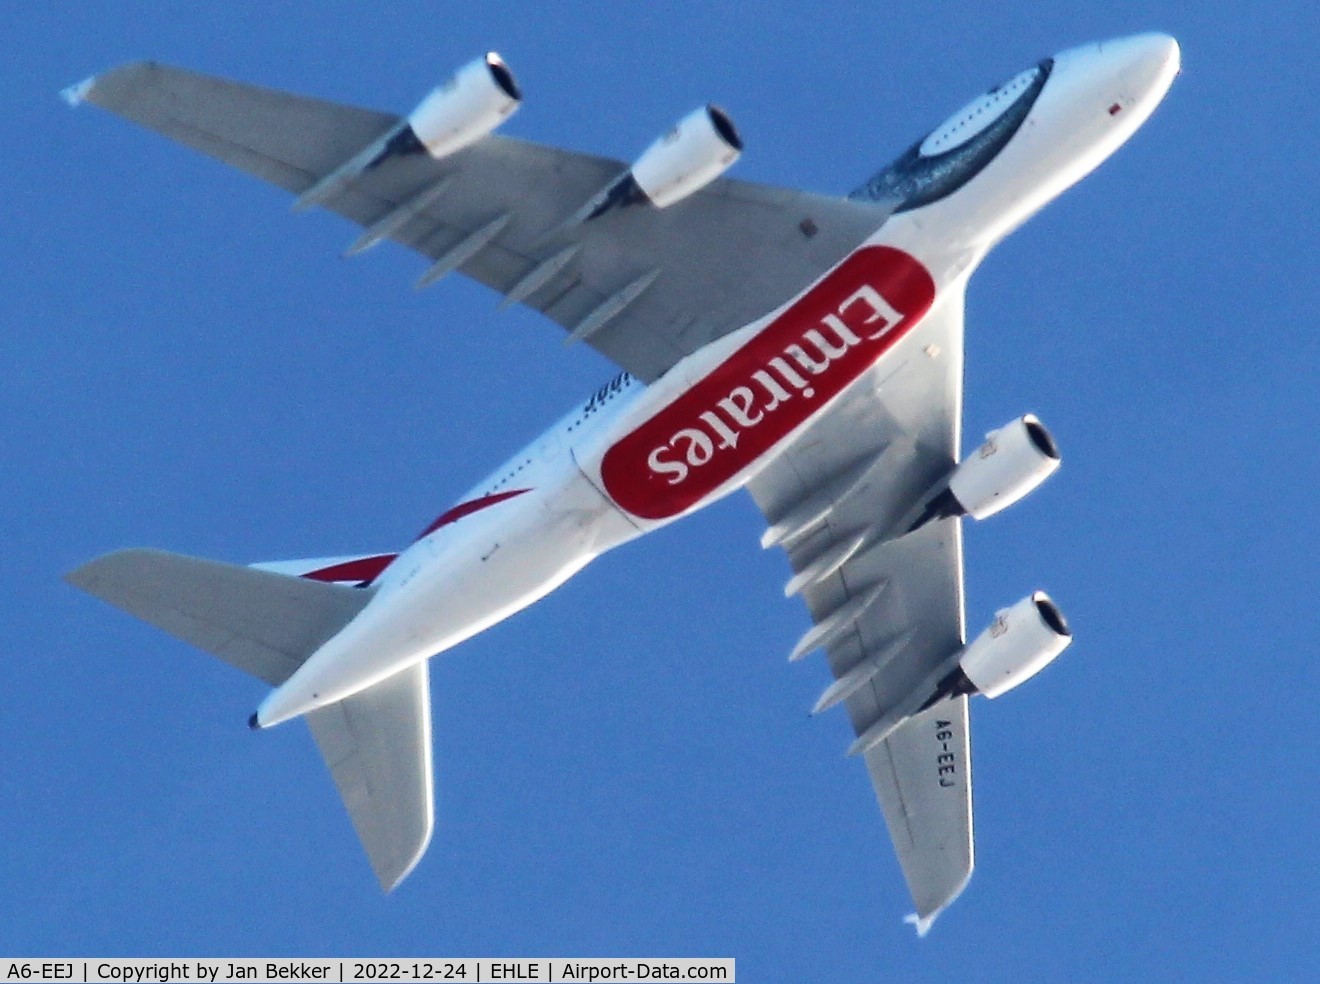 A6-EEJ, 2013 Airbus A380-861 C/N 127, Flying over at 10.000 feet to Amsterdam Schiphol EHAM